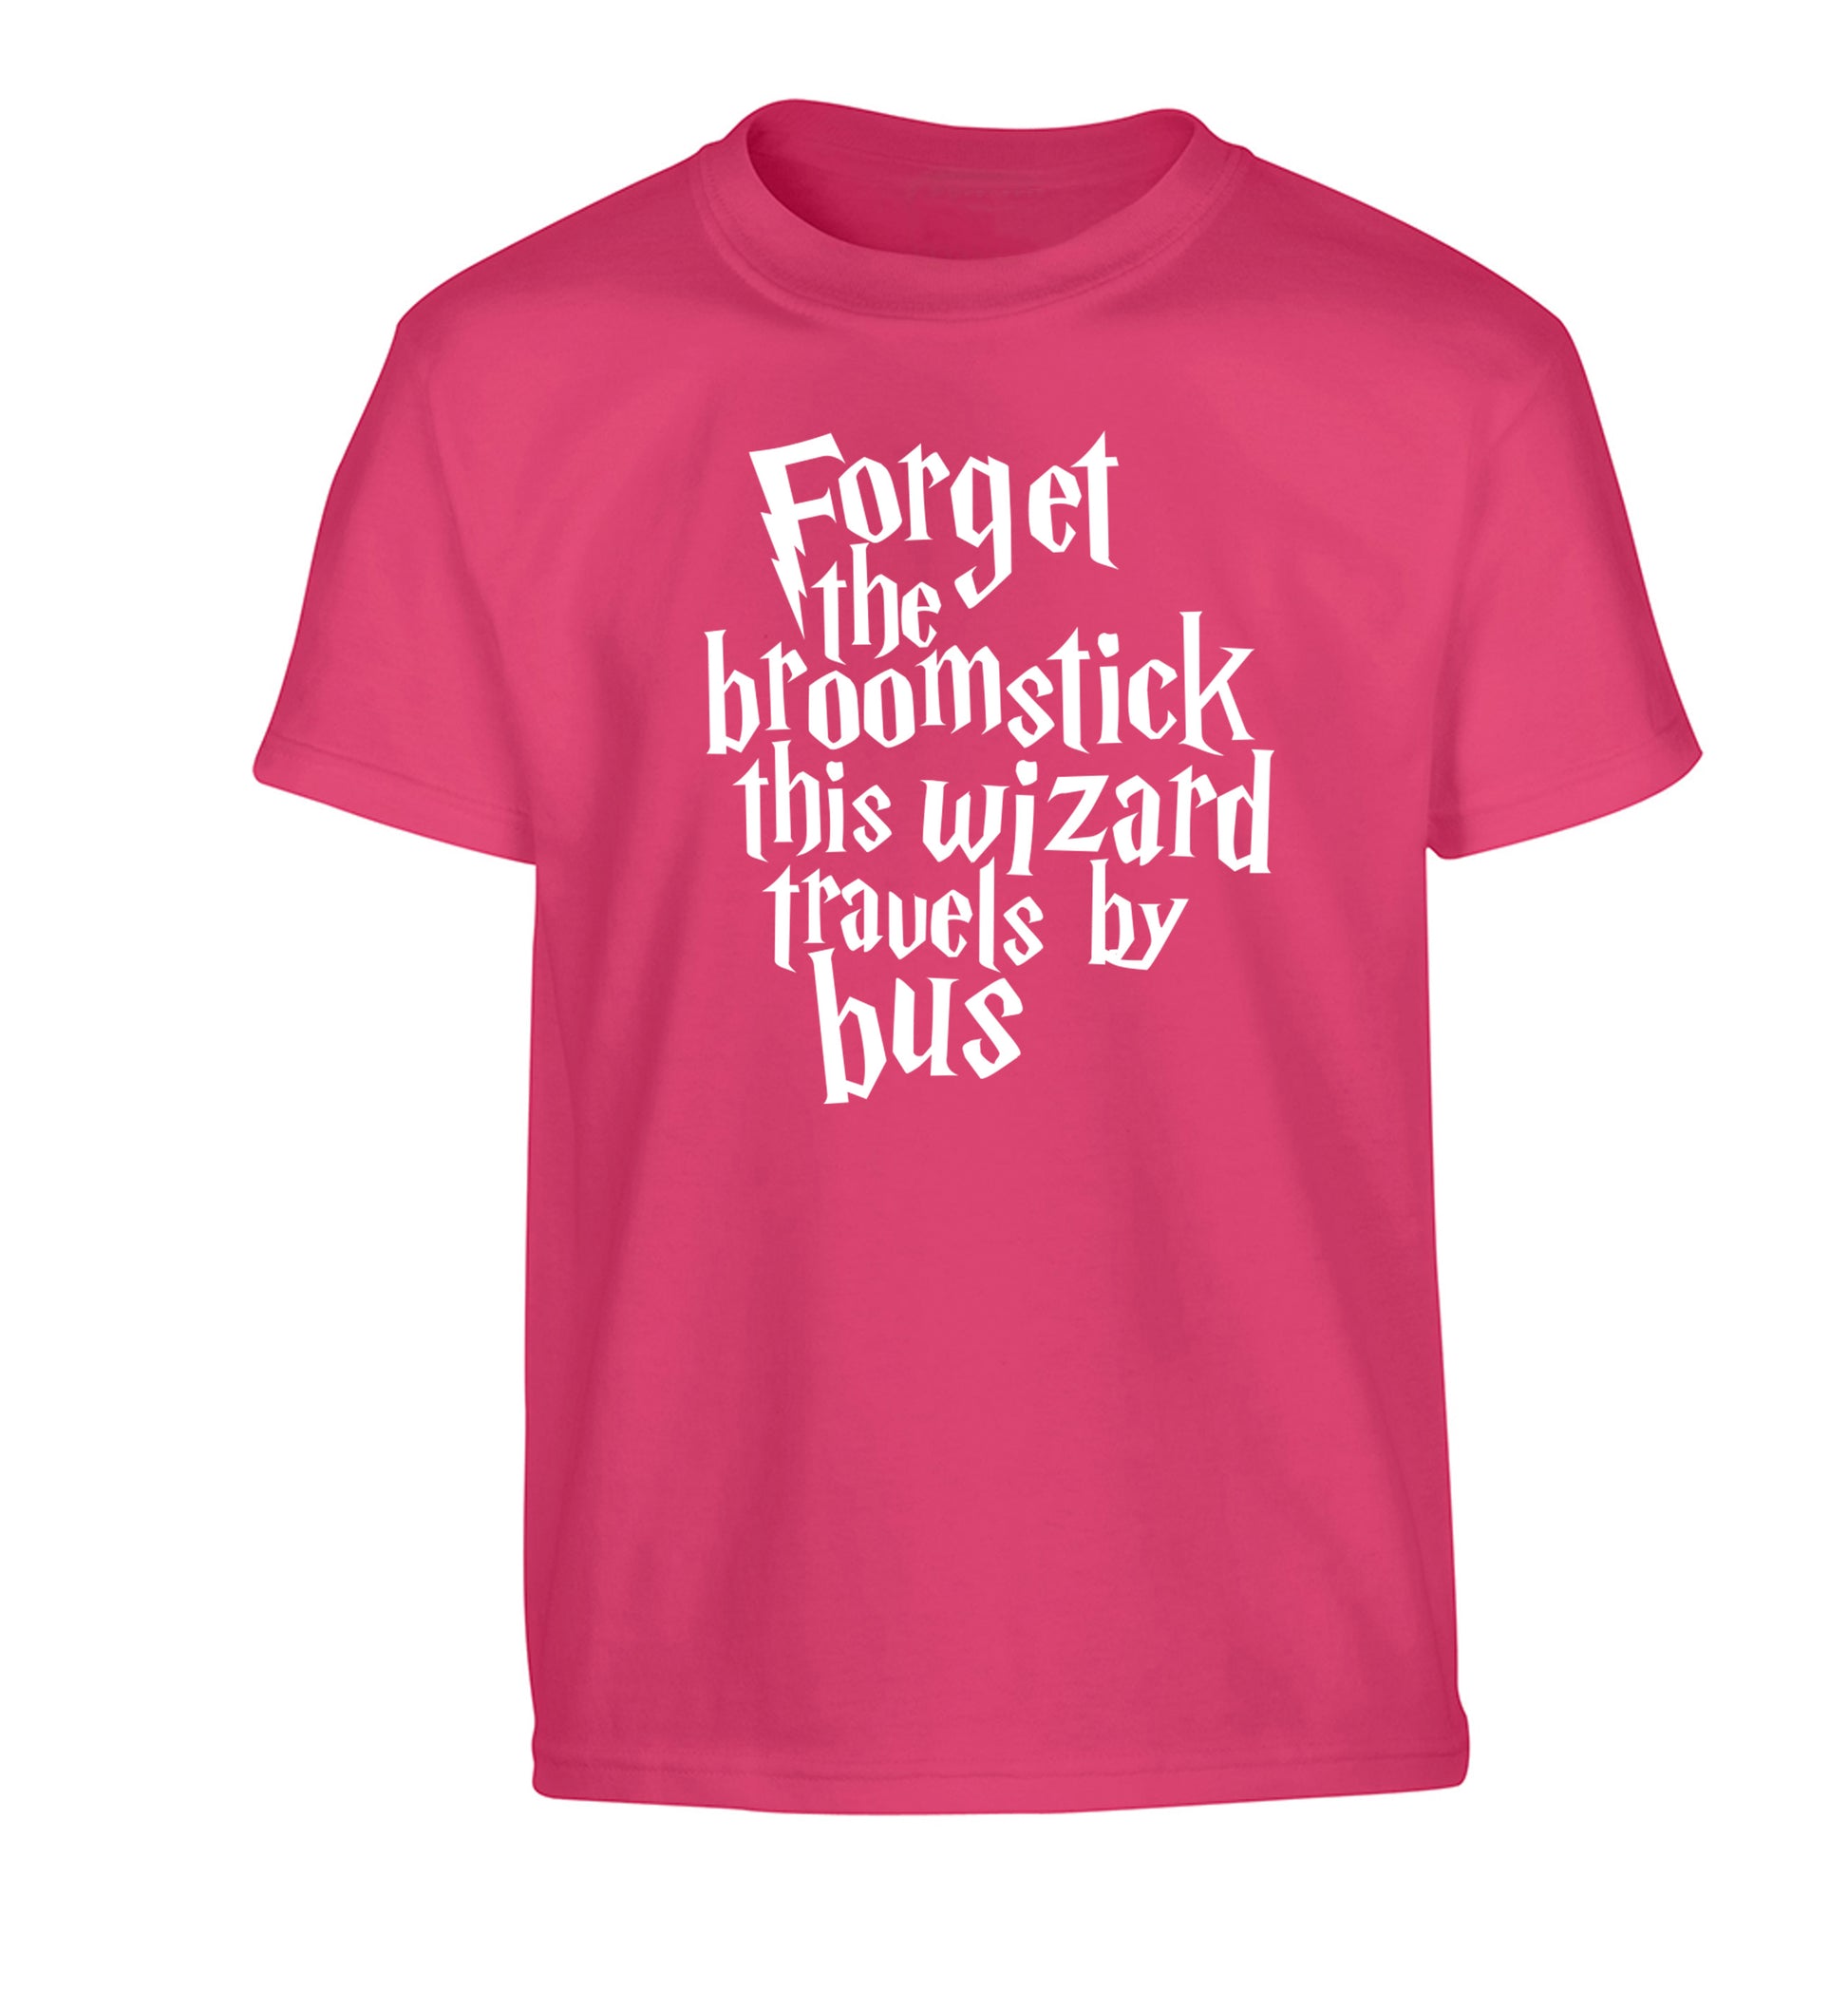 Forget the broomstick this wizard travels by bus Children's pink Tshirt 12-14 Years